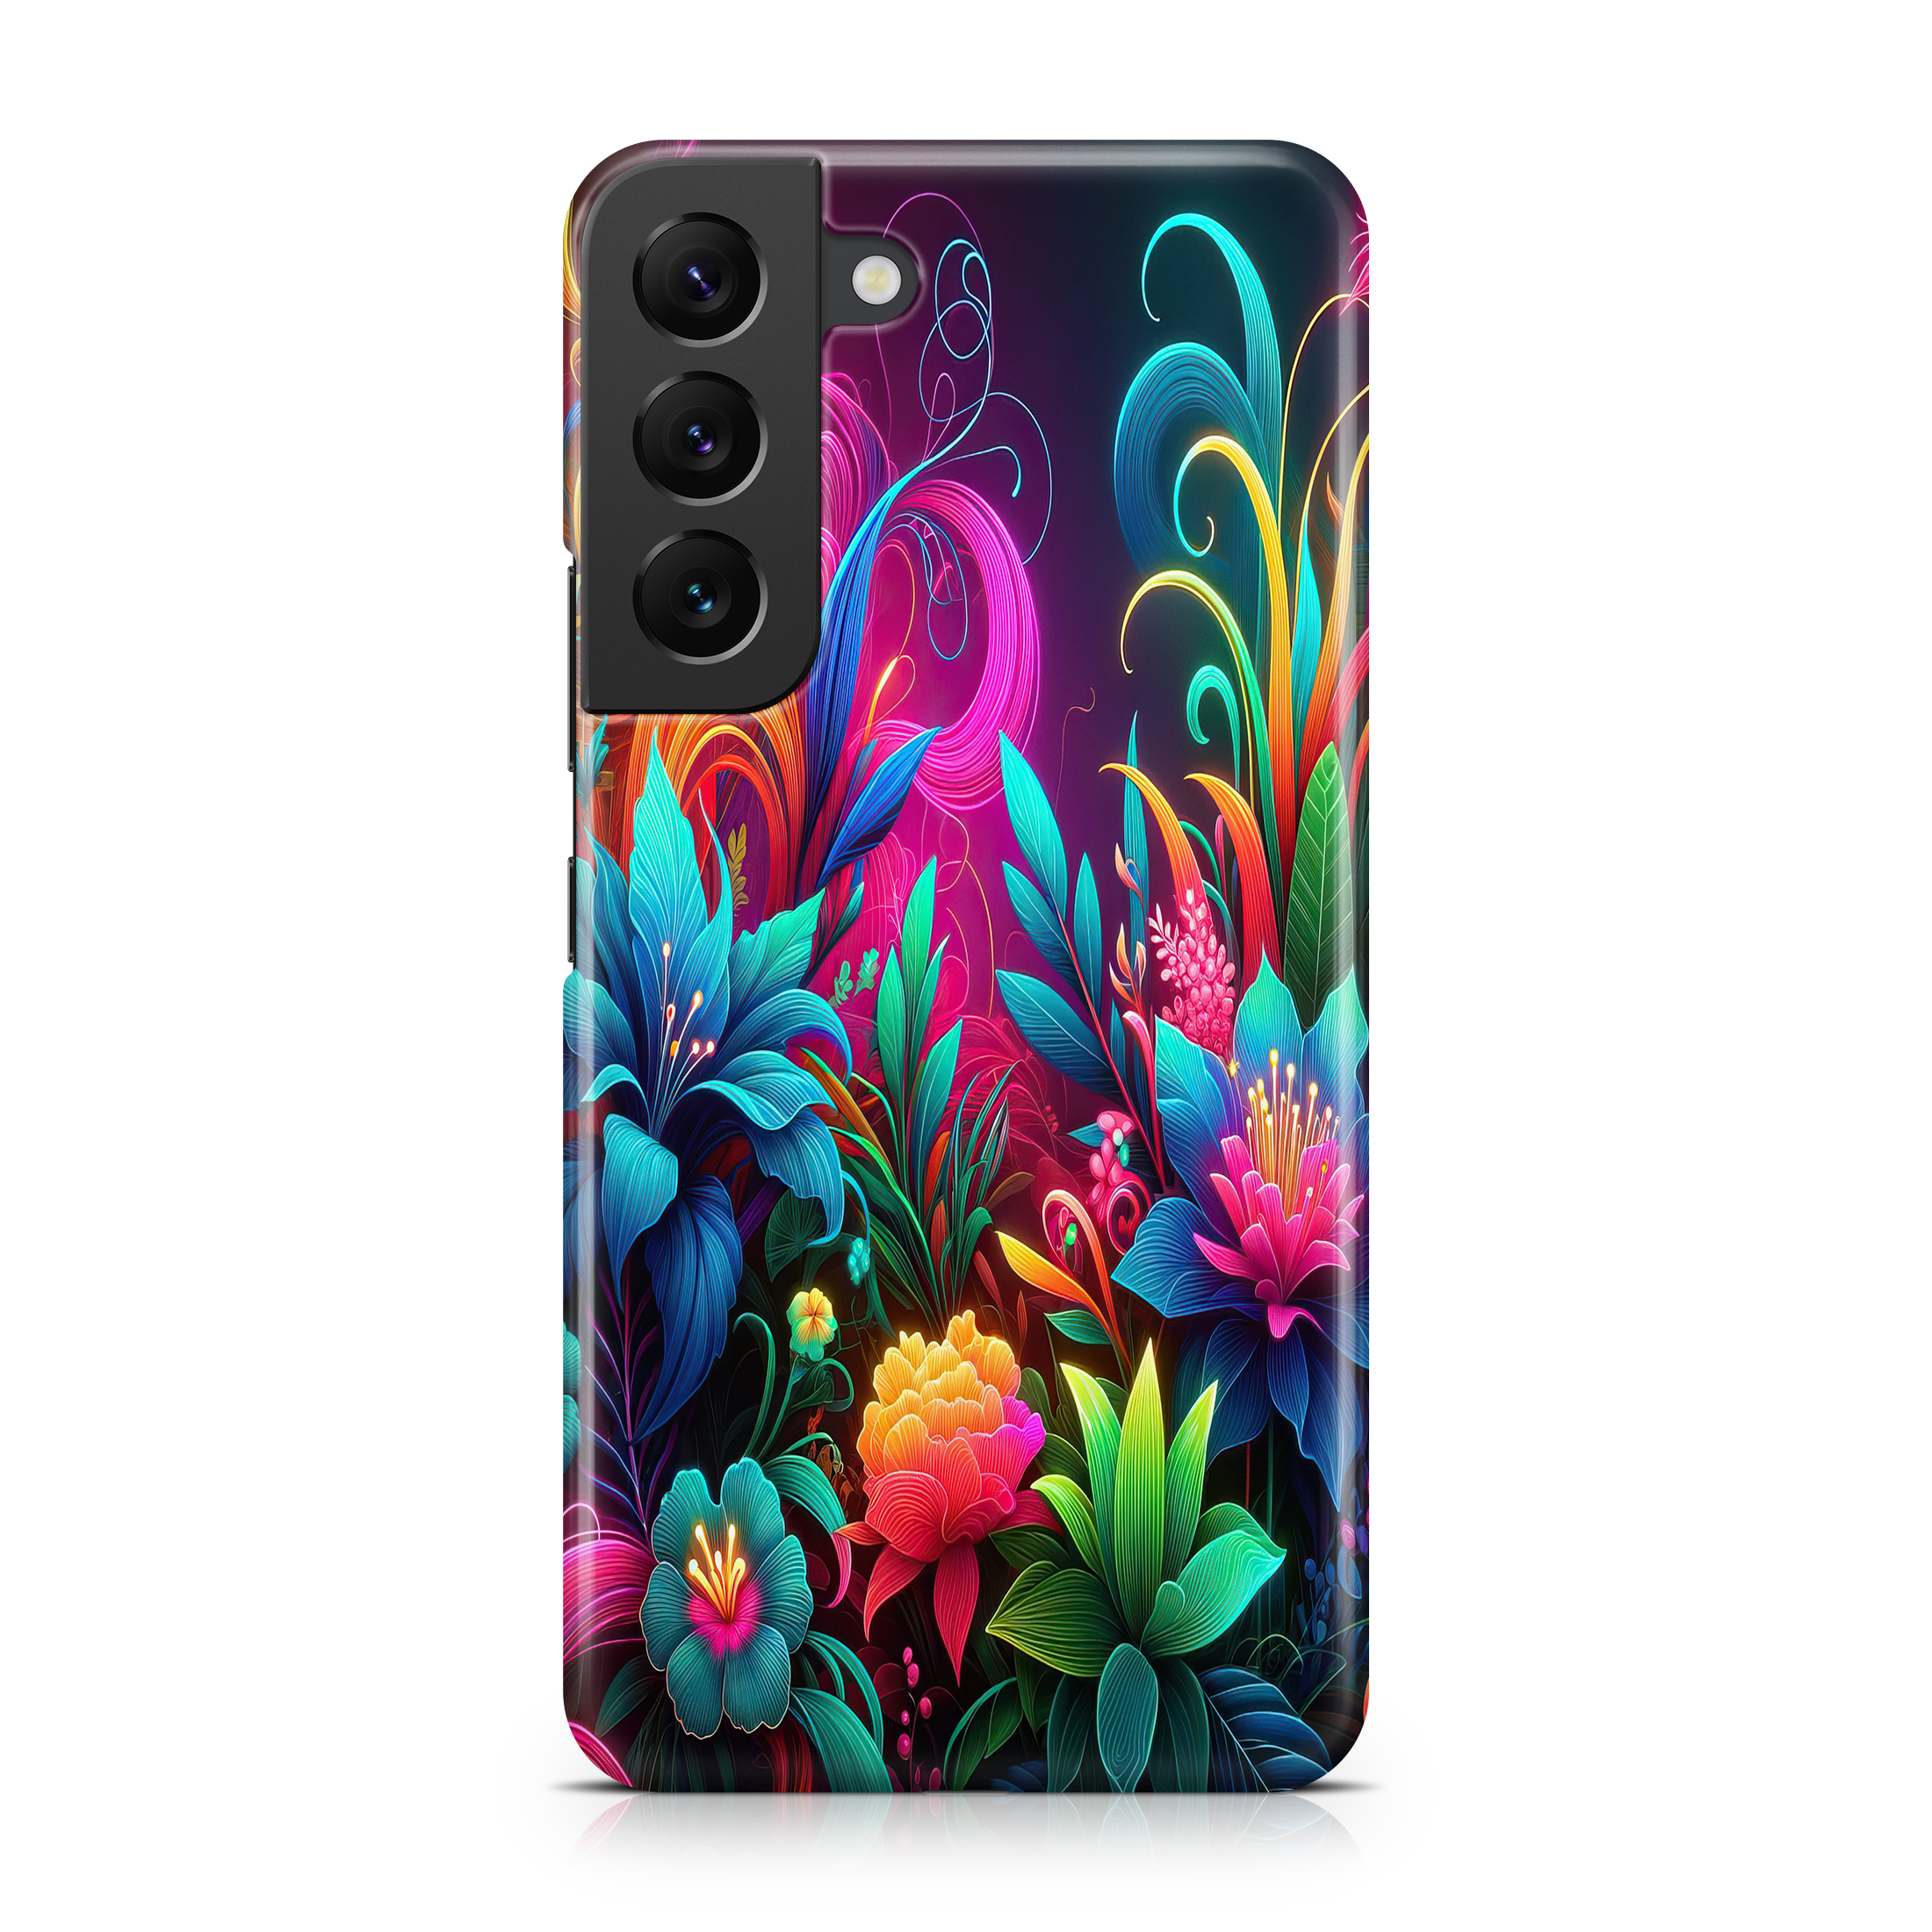 Neon Nectar - Samsung phone case designs by CaseSwagger